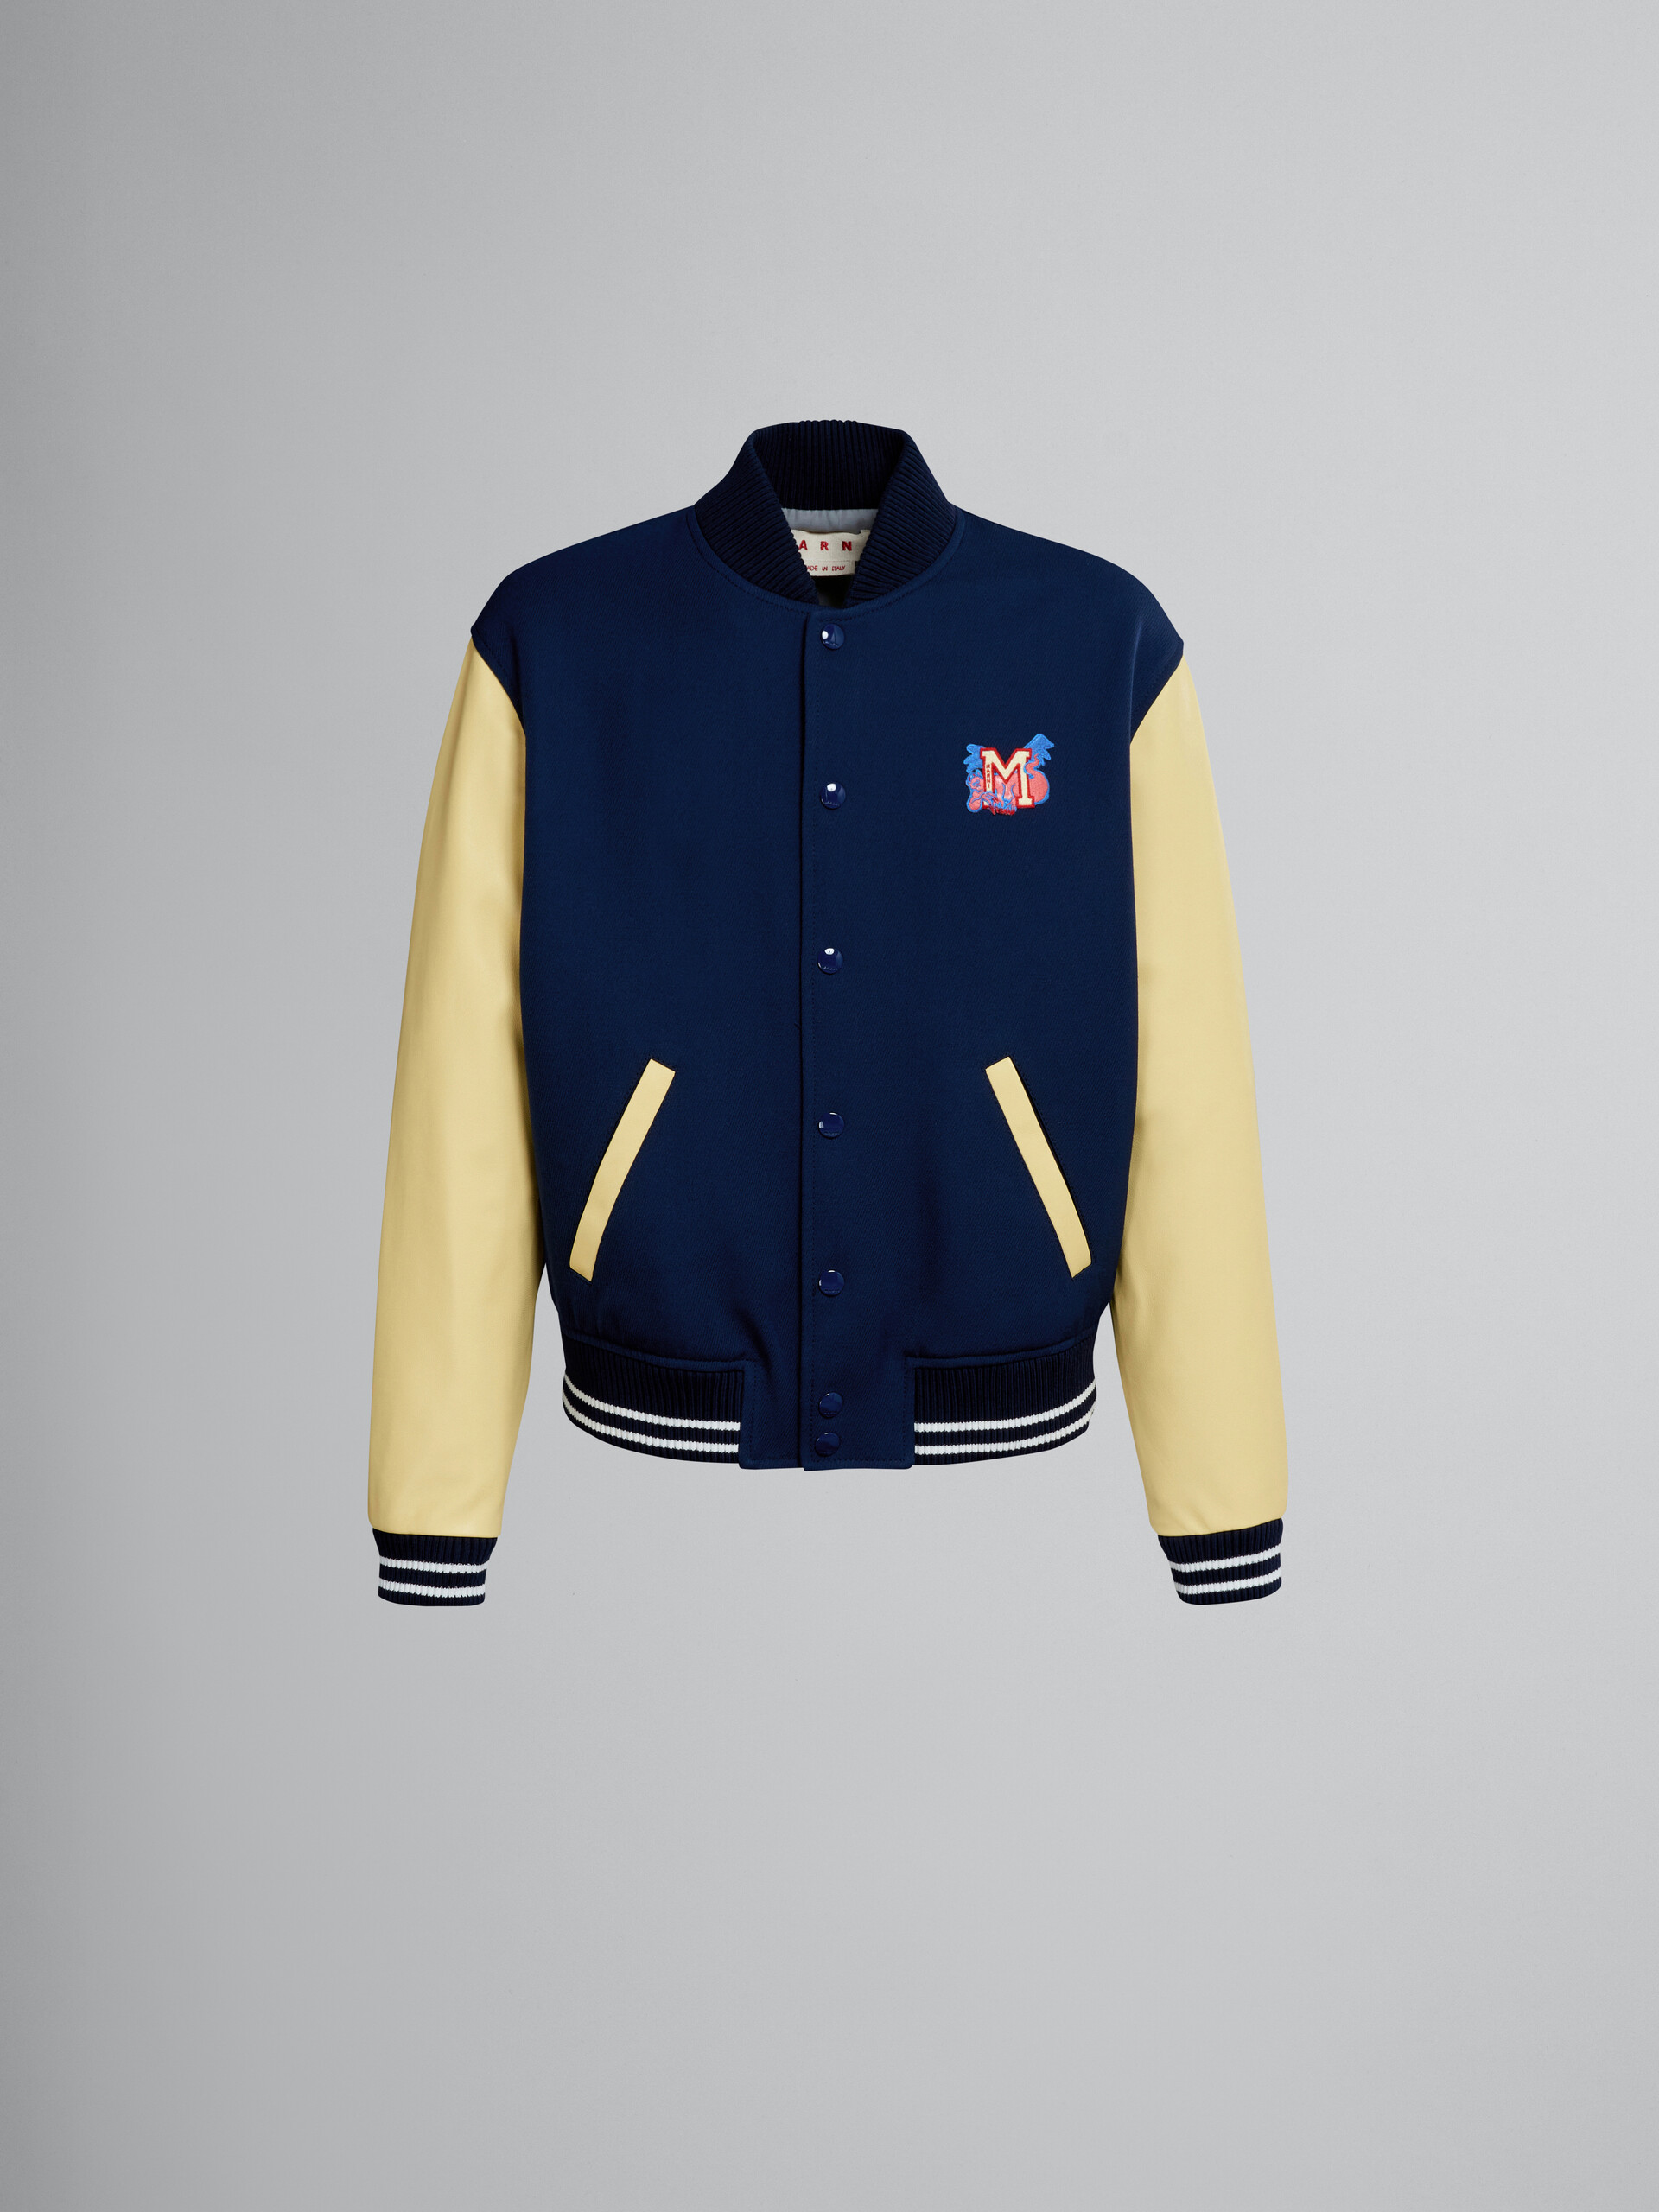 Blue cavalry wool varsity jacket with leather sleeves - Jackets - Image 1